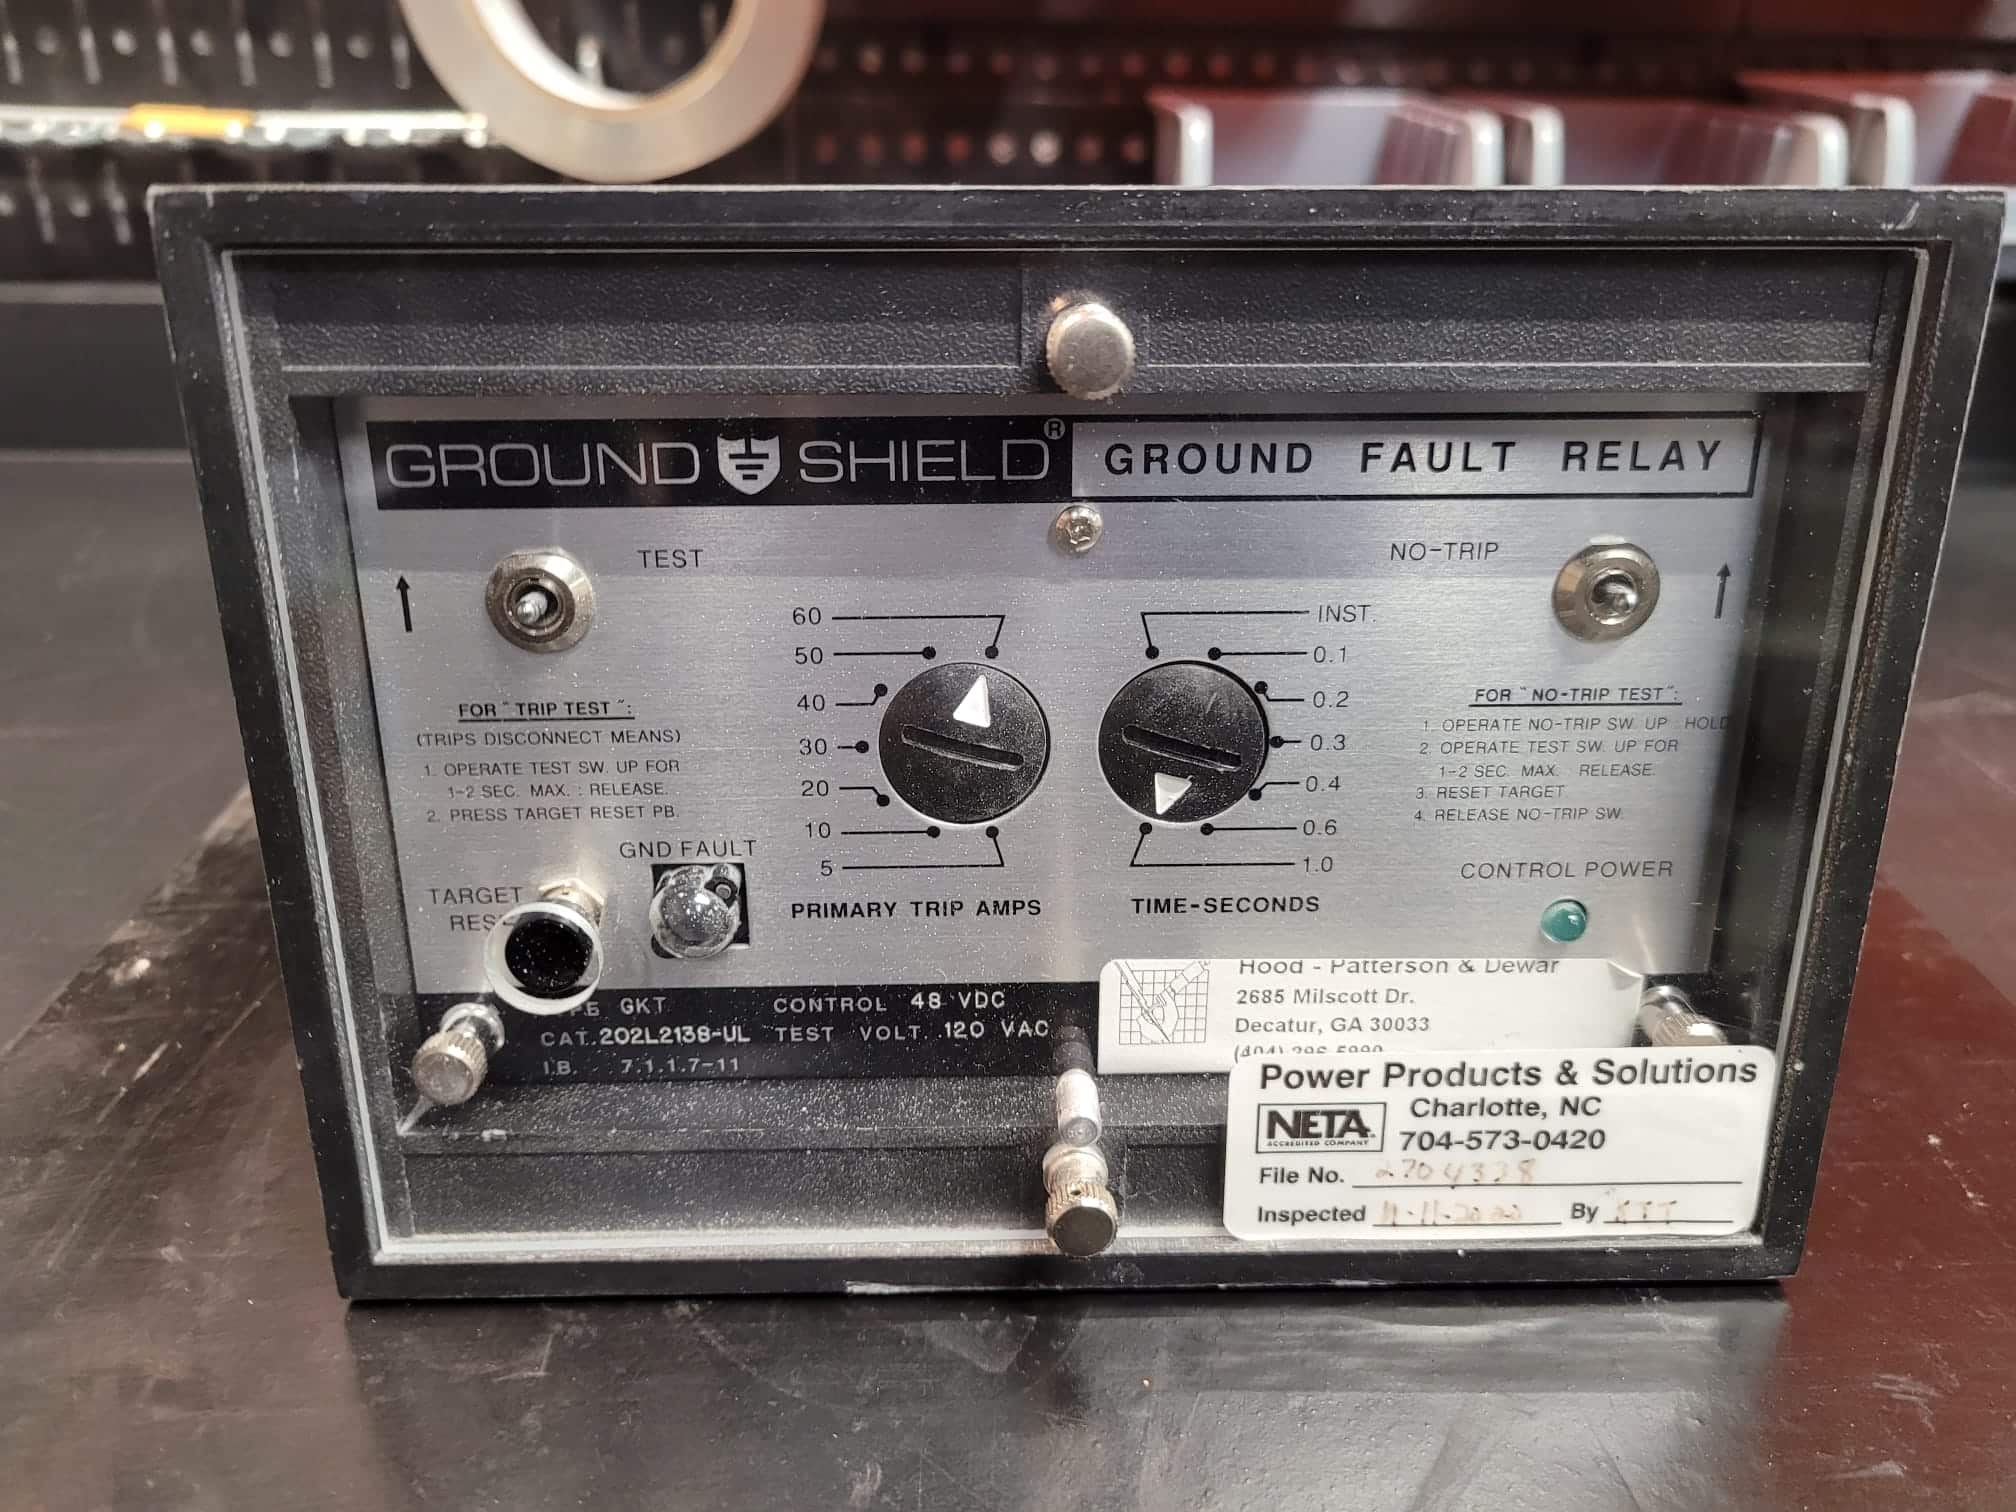 Used ABB GKT 202L2138-UL Ground Shield Ground Fault Relay